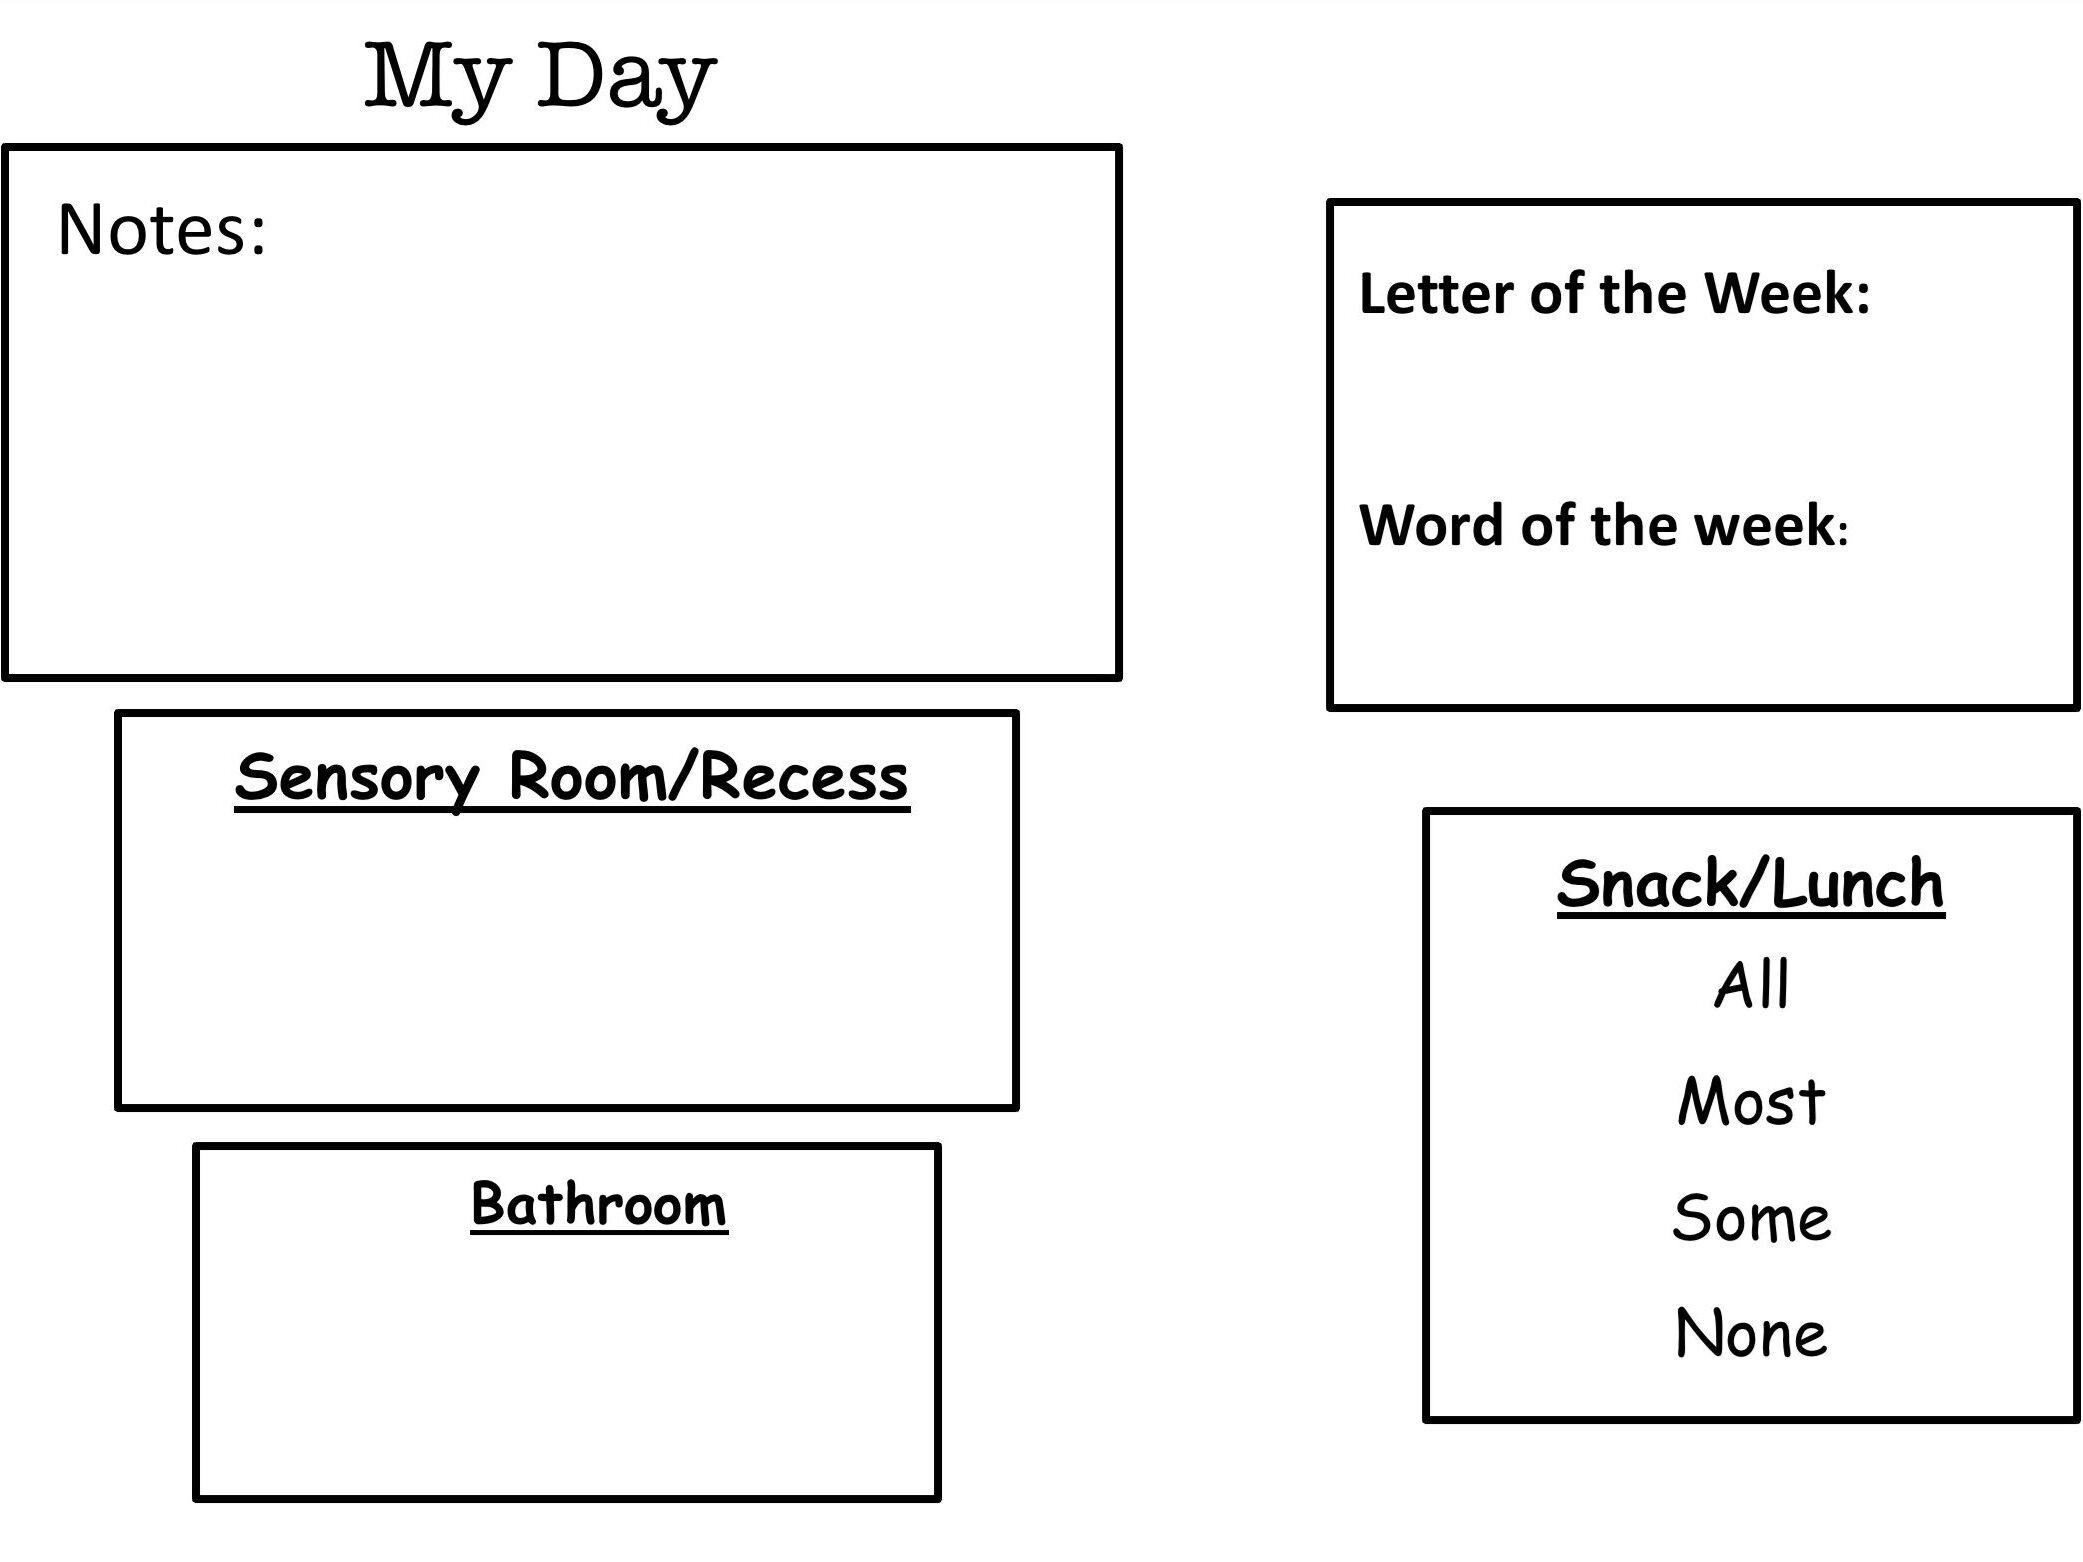 Part of my daily schedule for kindergarten Autism is to fill out daily communication sheets. I use this to write notes home about the day, behaviors, and important dates. 